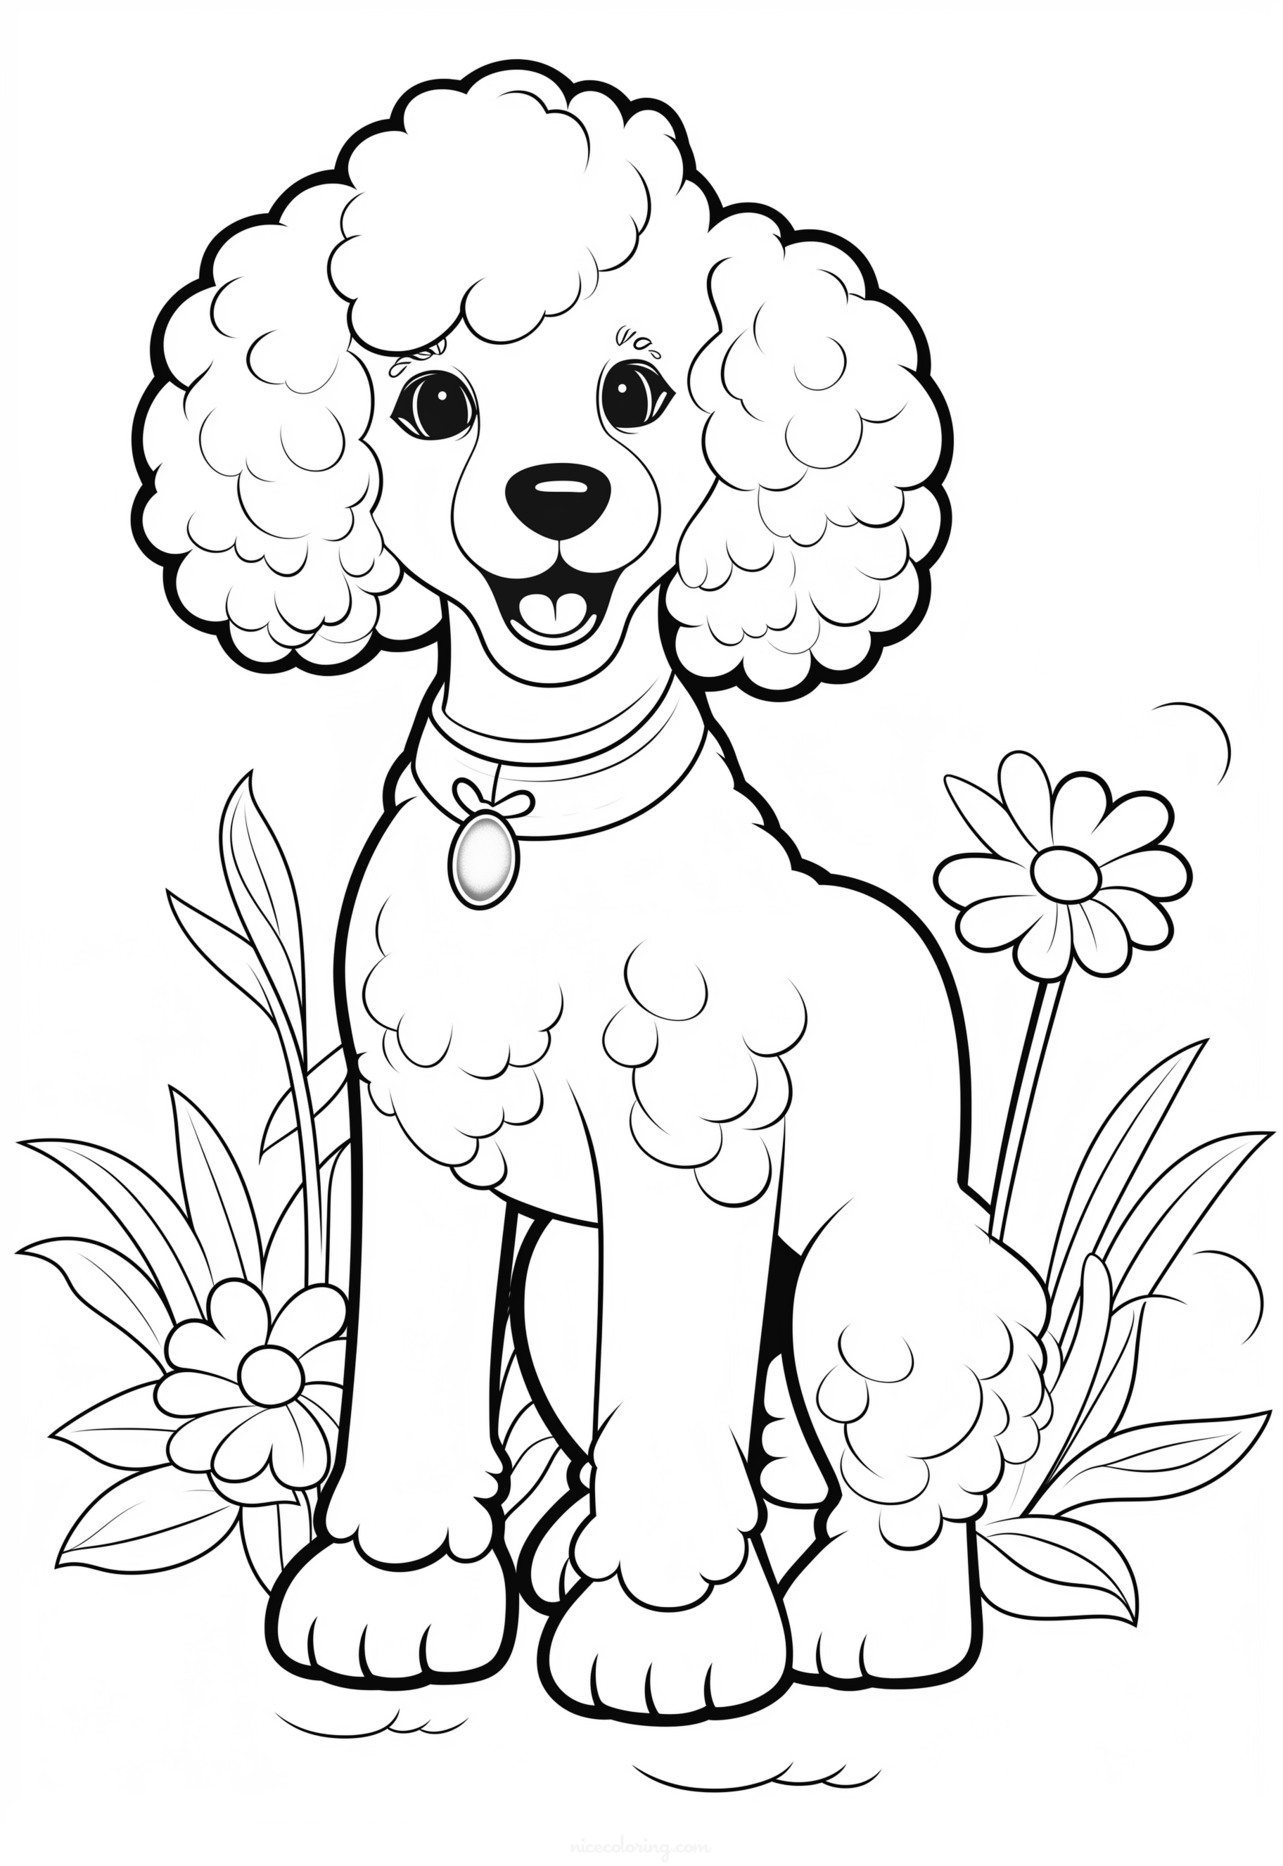 Playful dogs in a park coloring page